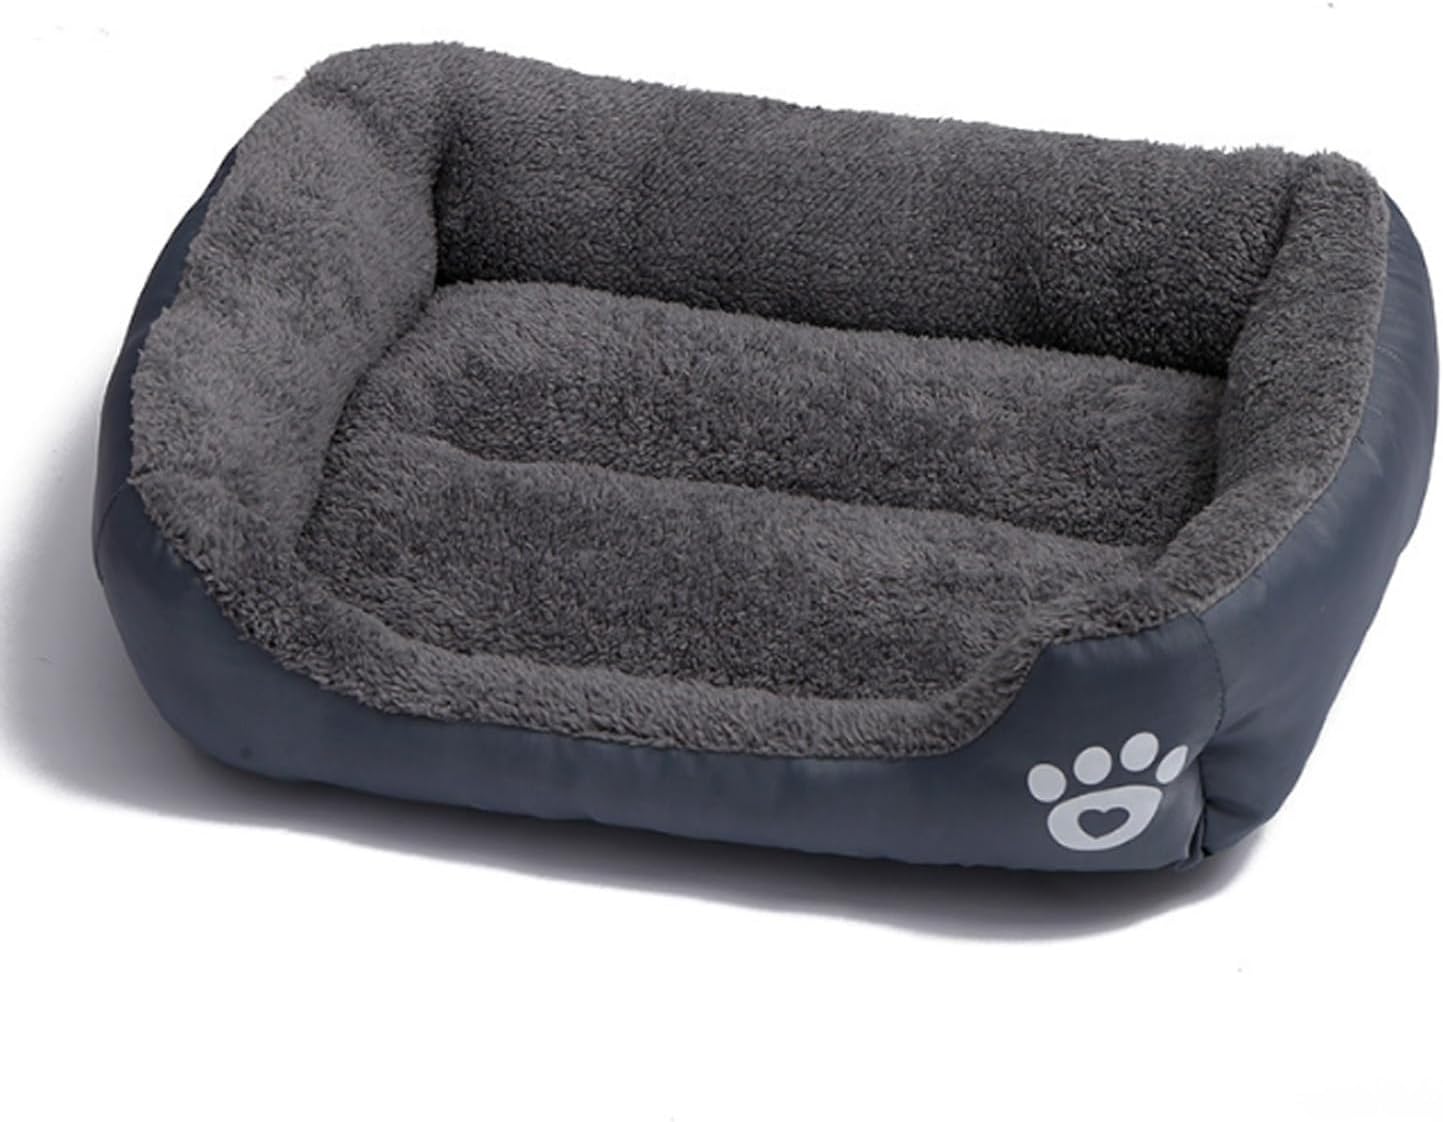 Grizzly Square Dog Bed Grey Small - 43 x 32cm Square Dog Bed